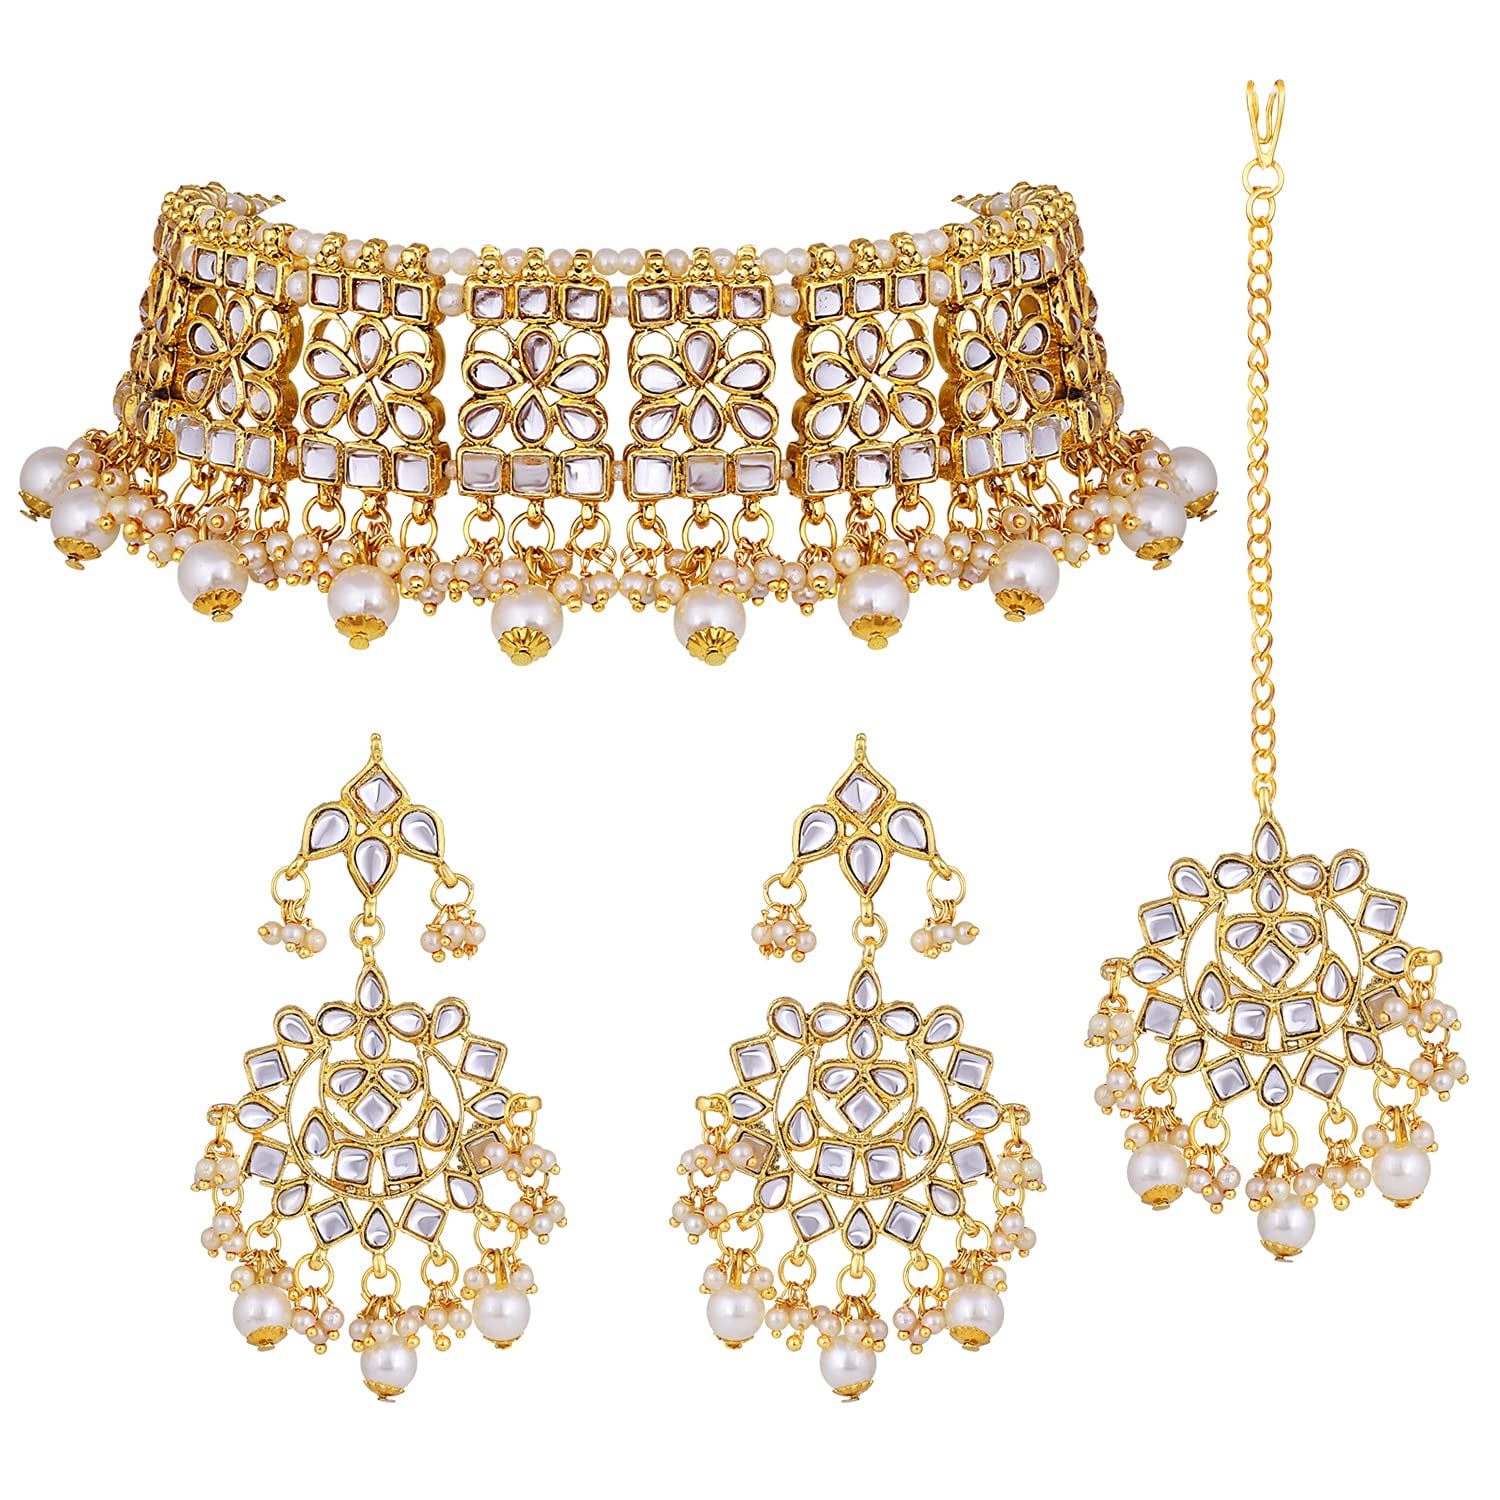 Aheli Beautiful Wedding Wear Indian Laxmi Goddess Faux Stone Studded Floral Design Crafted Necklace Earrings Set Ethnic Fashion Jewelry for Women 